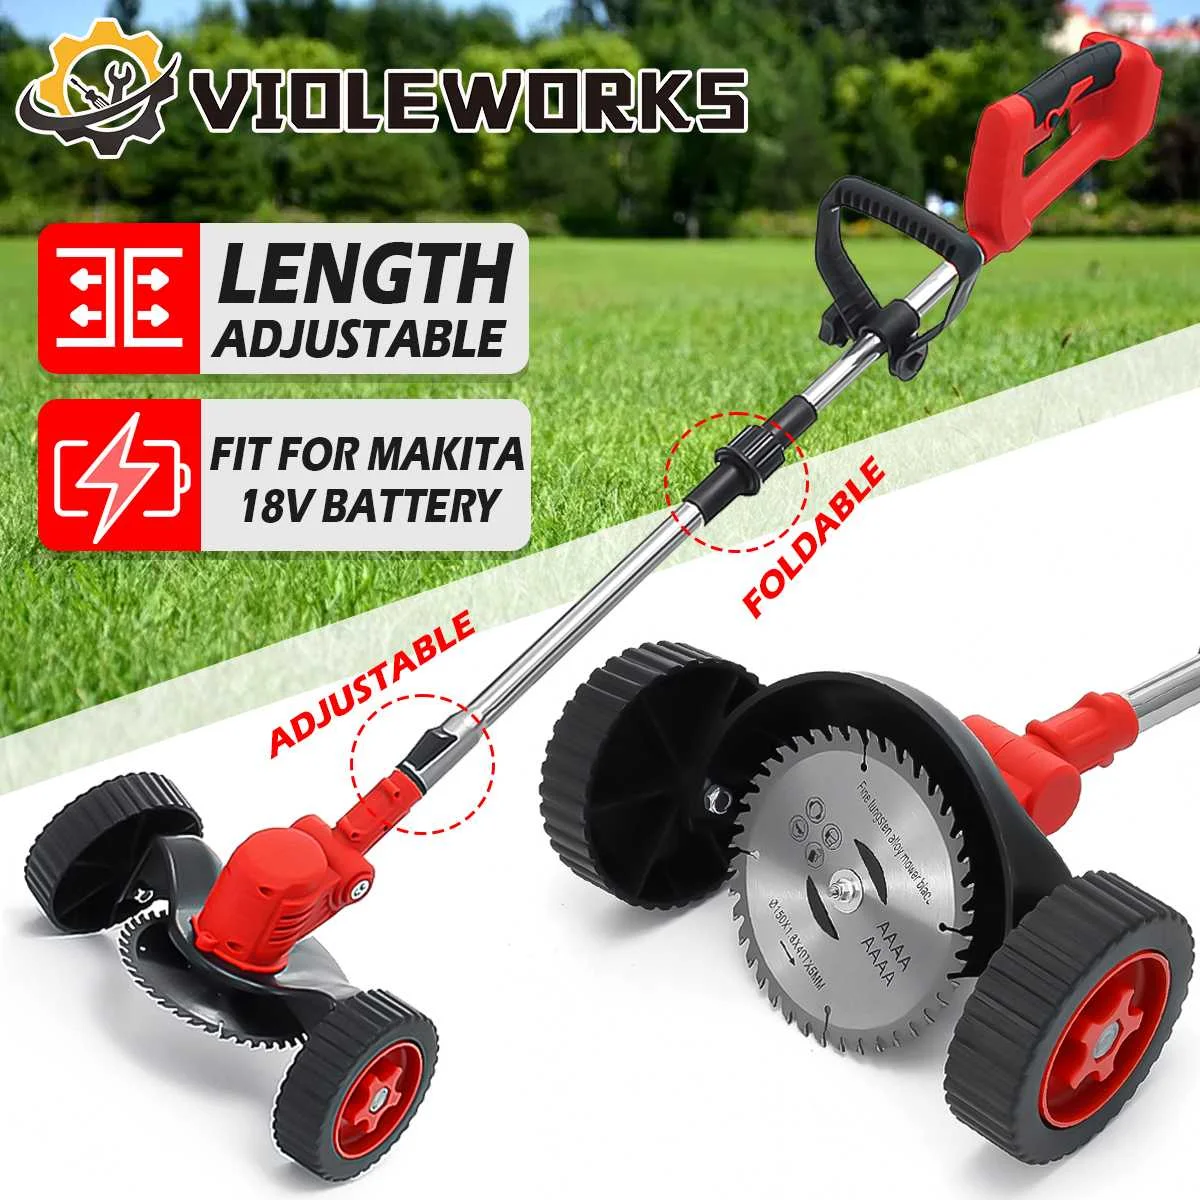 VIOLEWORKS Electric Lawn Mower Cordless Grass Trimmer Length Adjustable Cutter Household Garden Tools For Makita 18V Battery